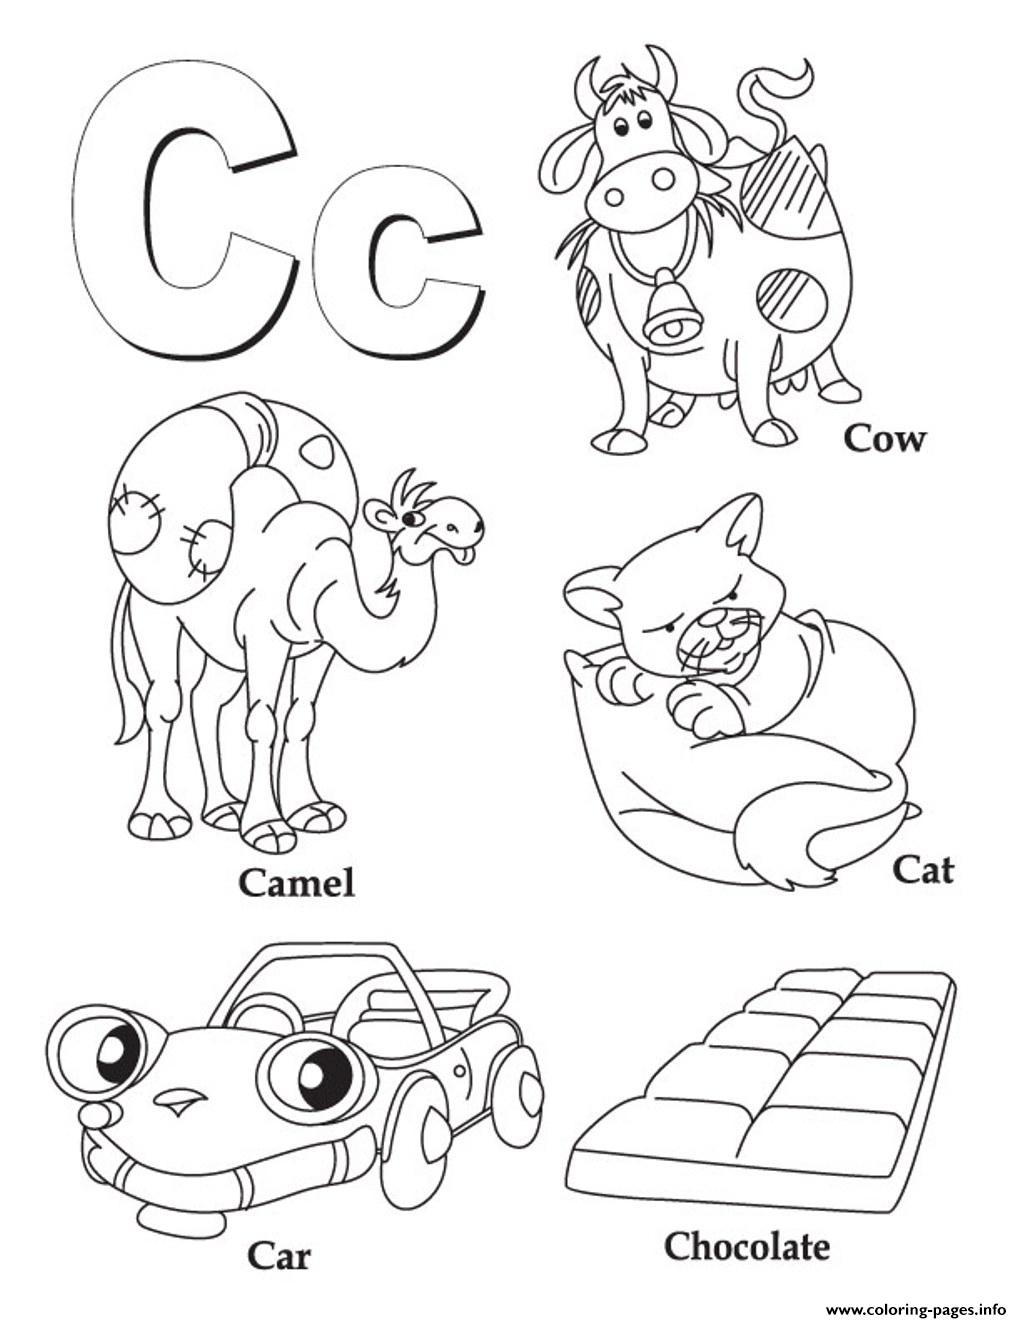 Coloring Pages Alphabet C Printable2388 Coloring Pages Printable